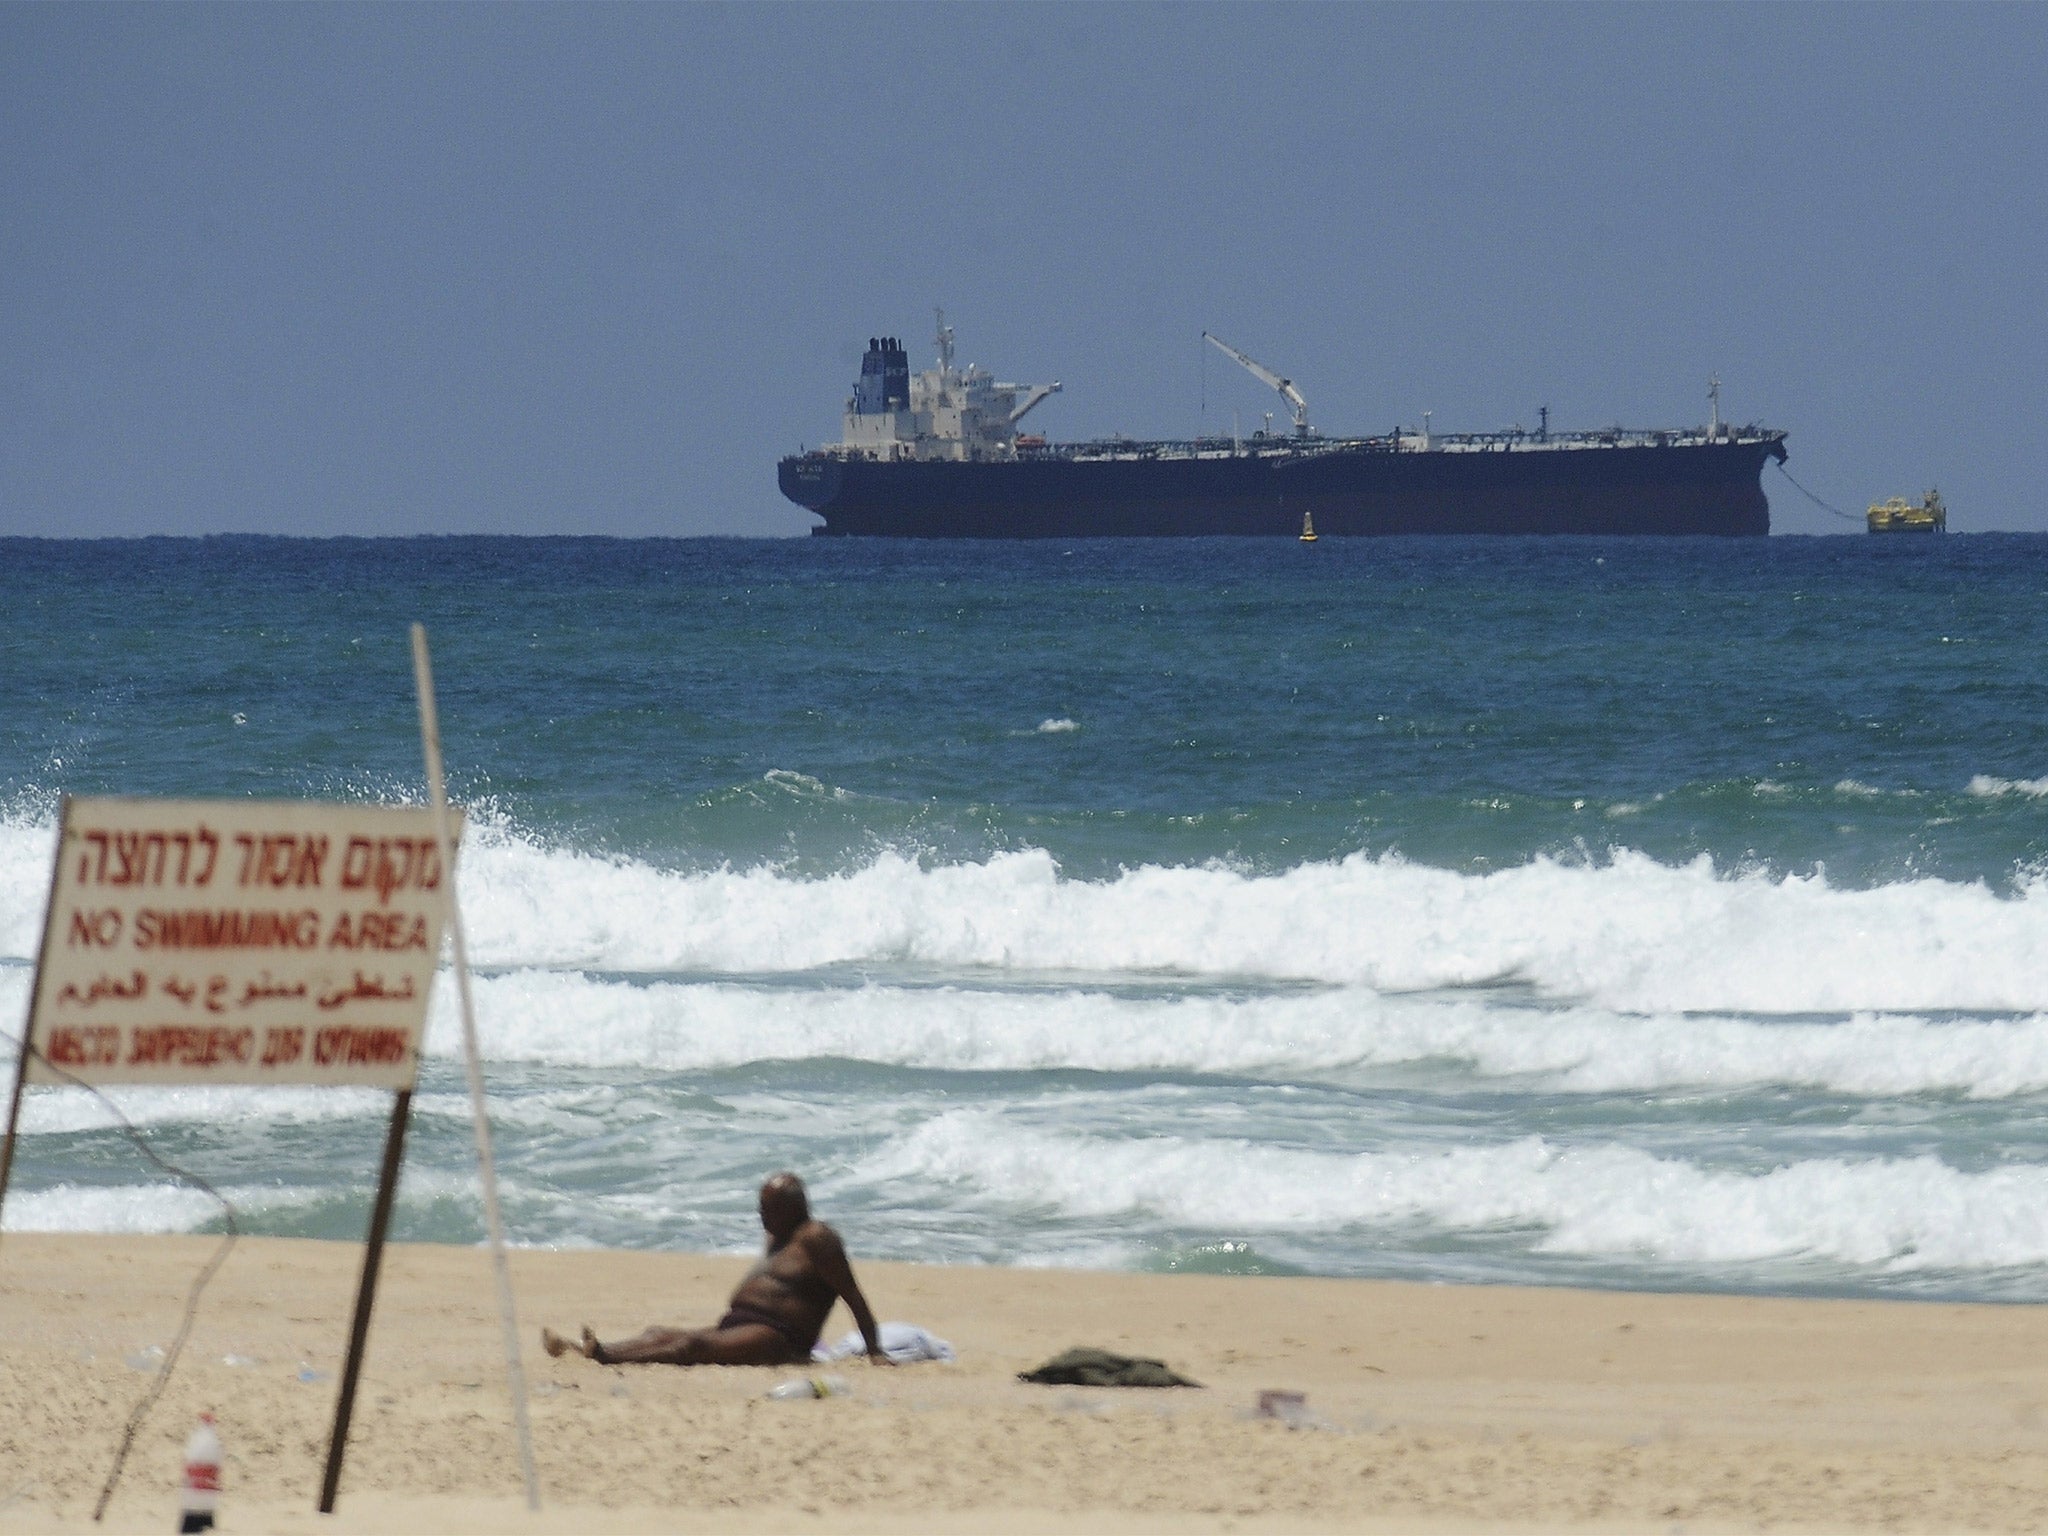 A tanker laden with oil from Kurdistan off Israel earlier this year